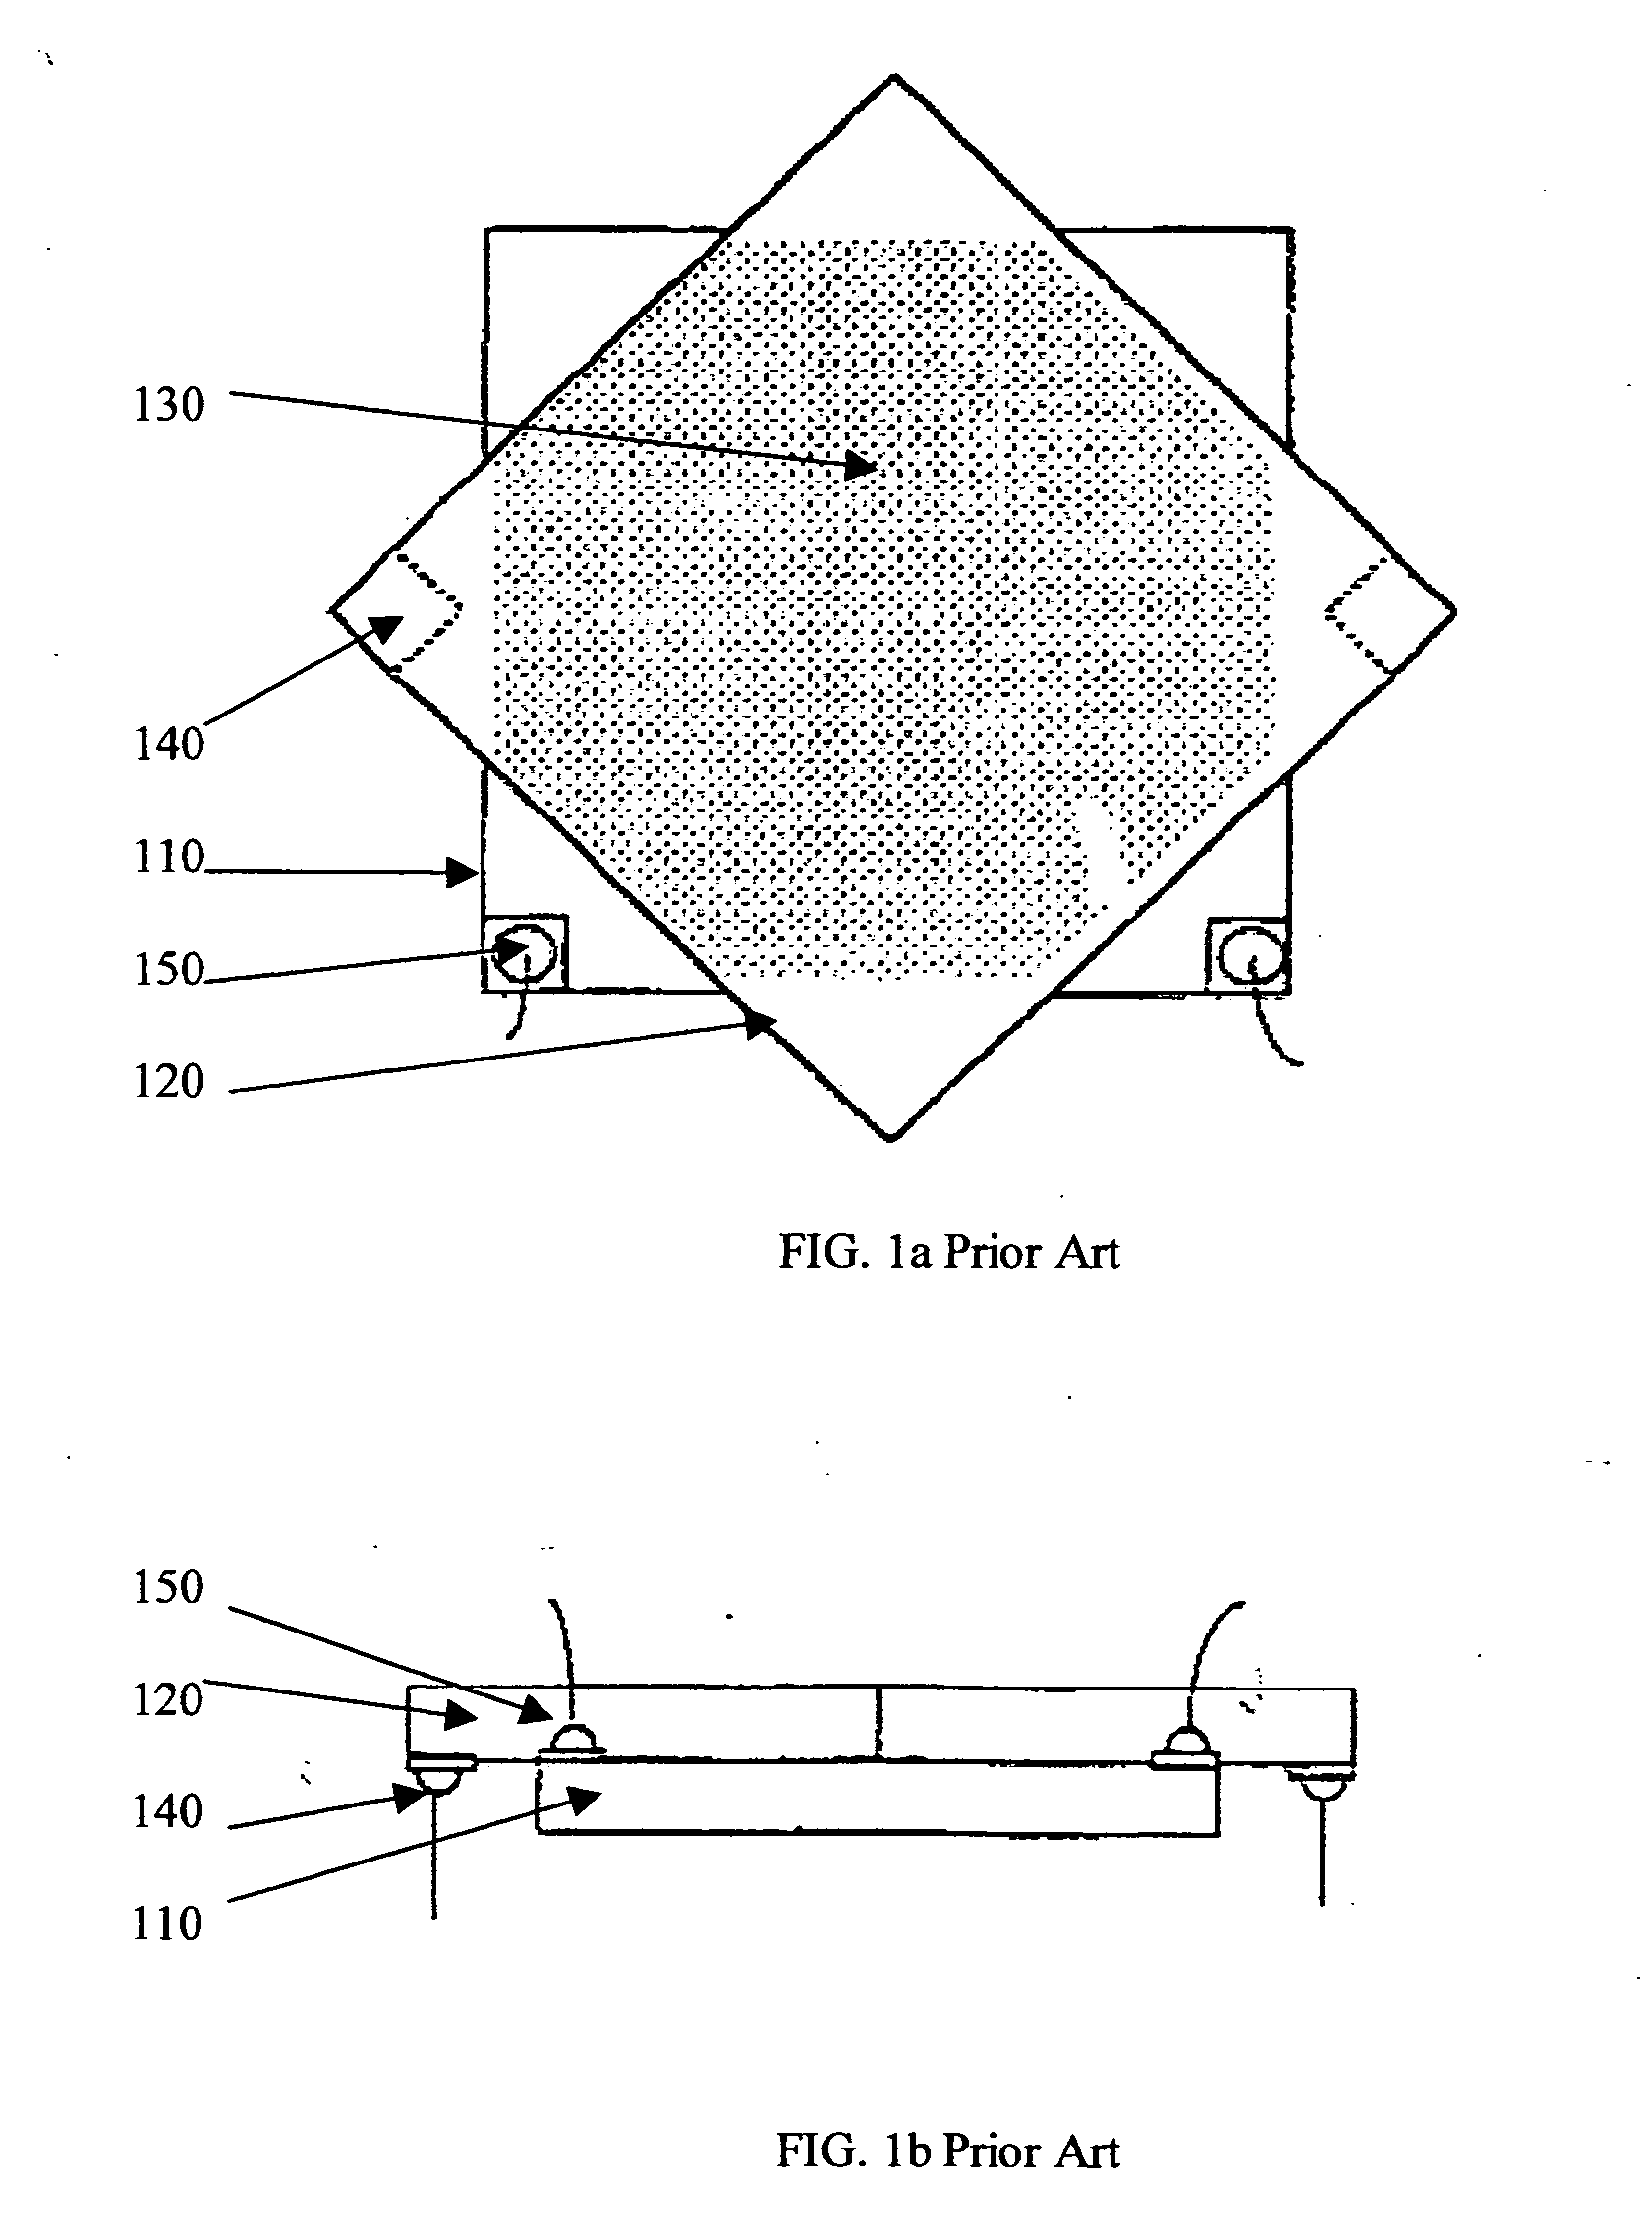 High power and high brightness white LED assemblies and method for mass production of the same